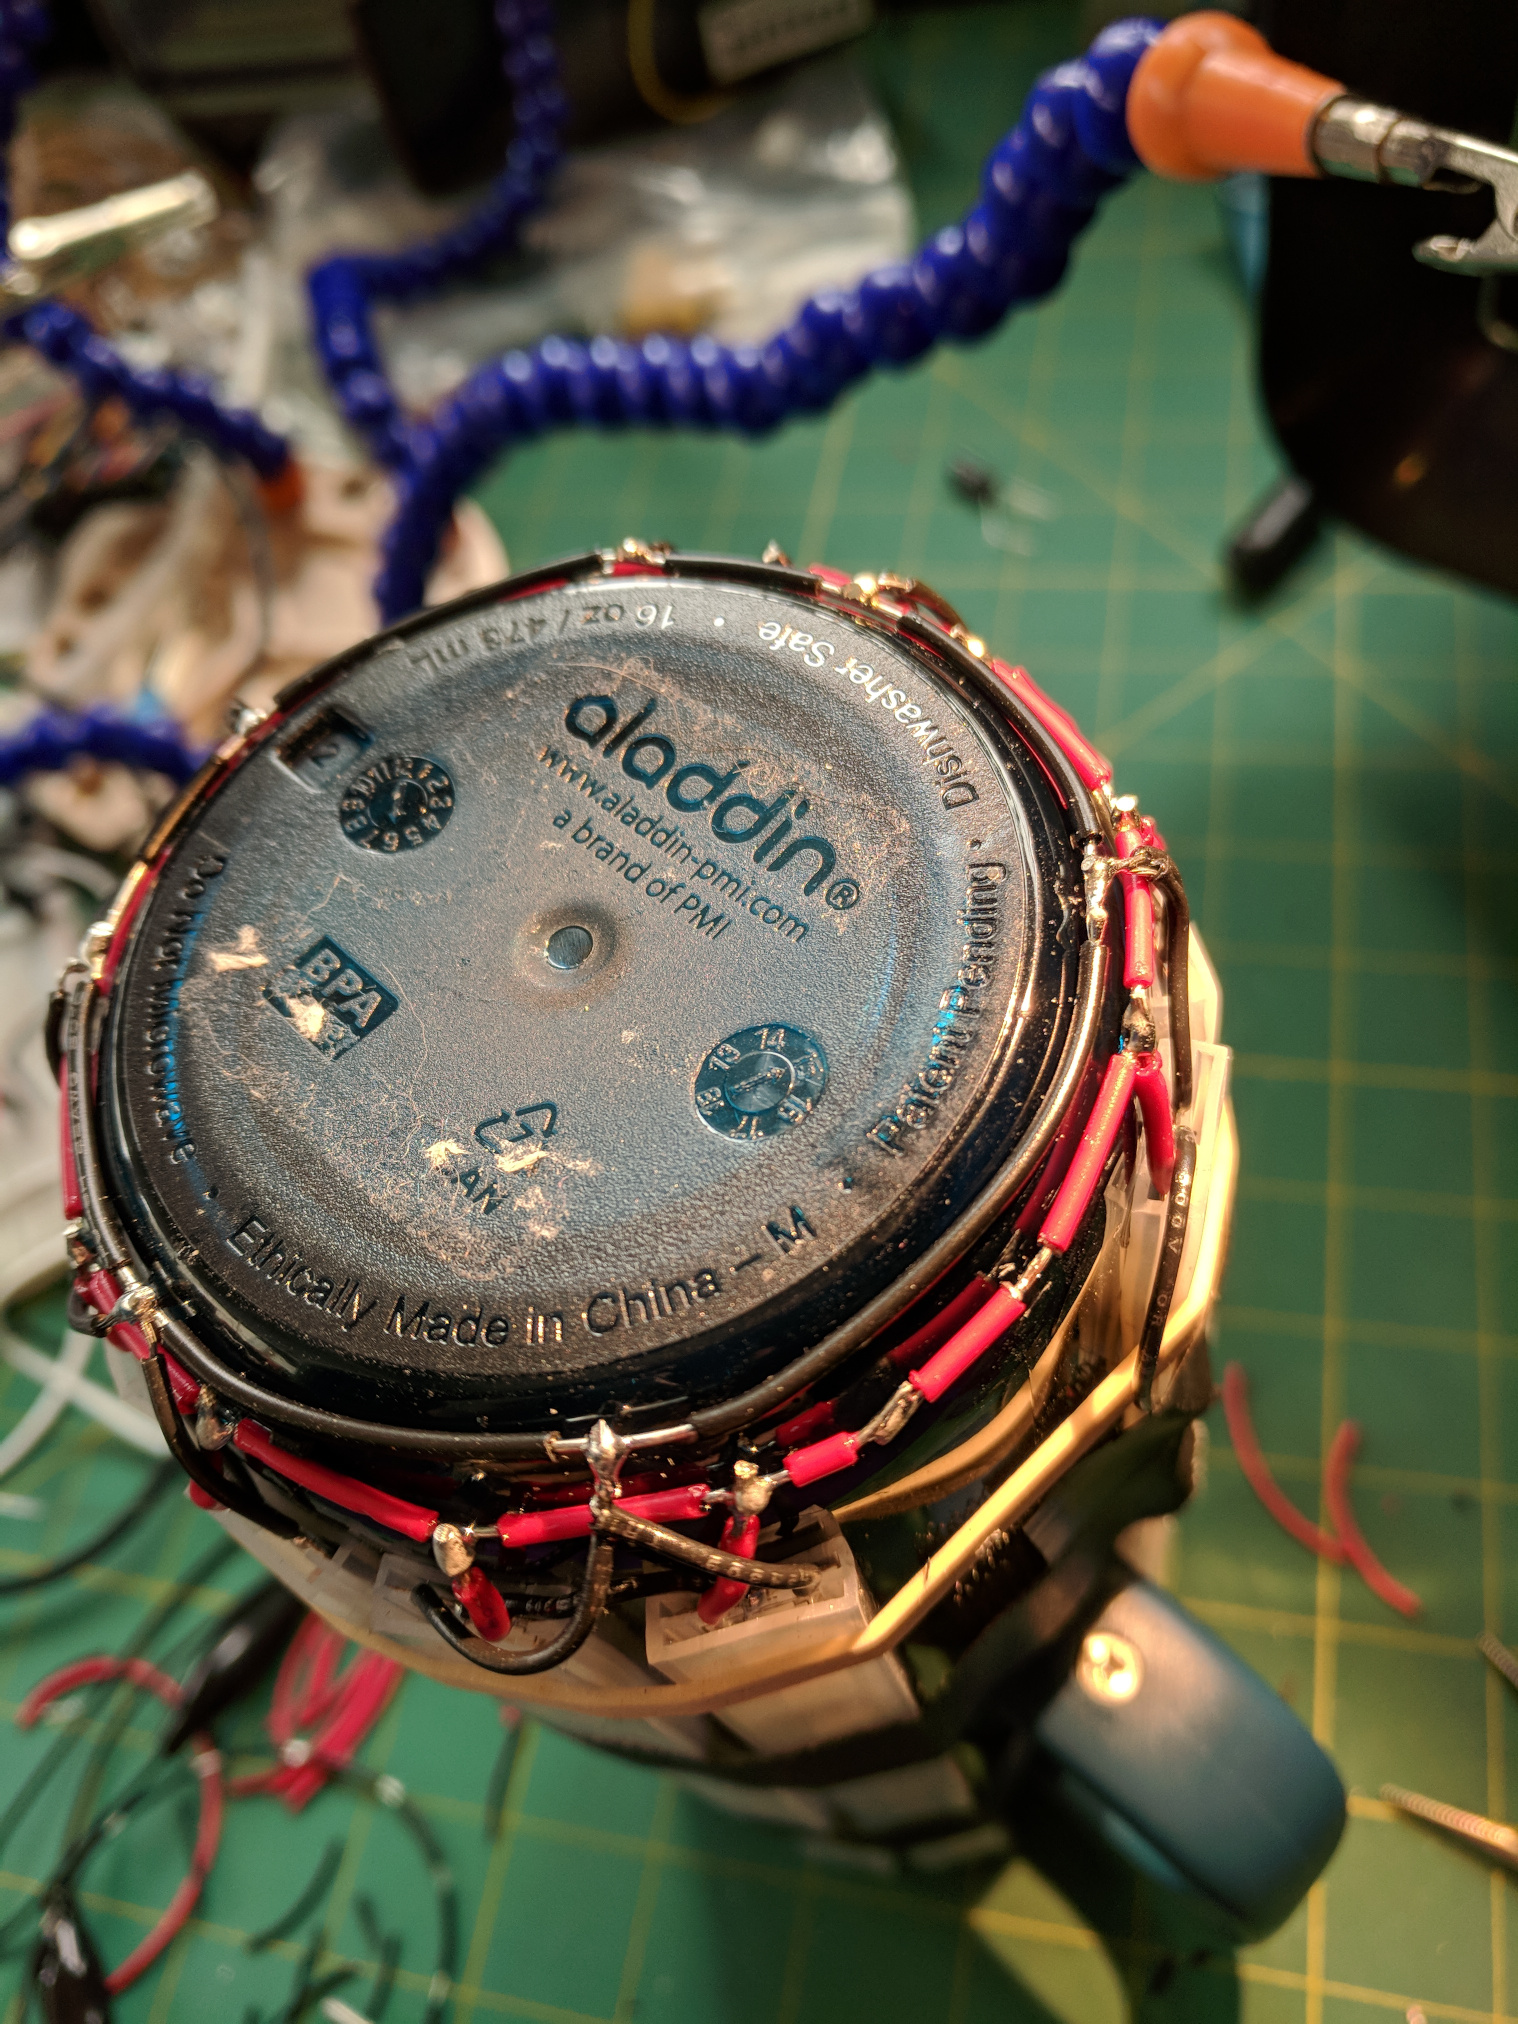 Close up of the bottom of the water bottle and LED strips showing power and ground LED connections in a ring, neatly trimmed.